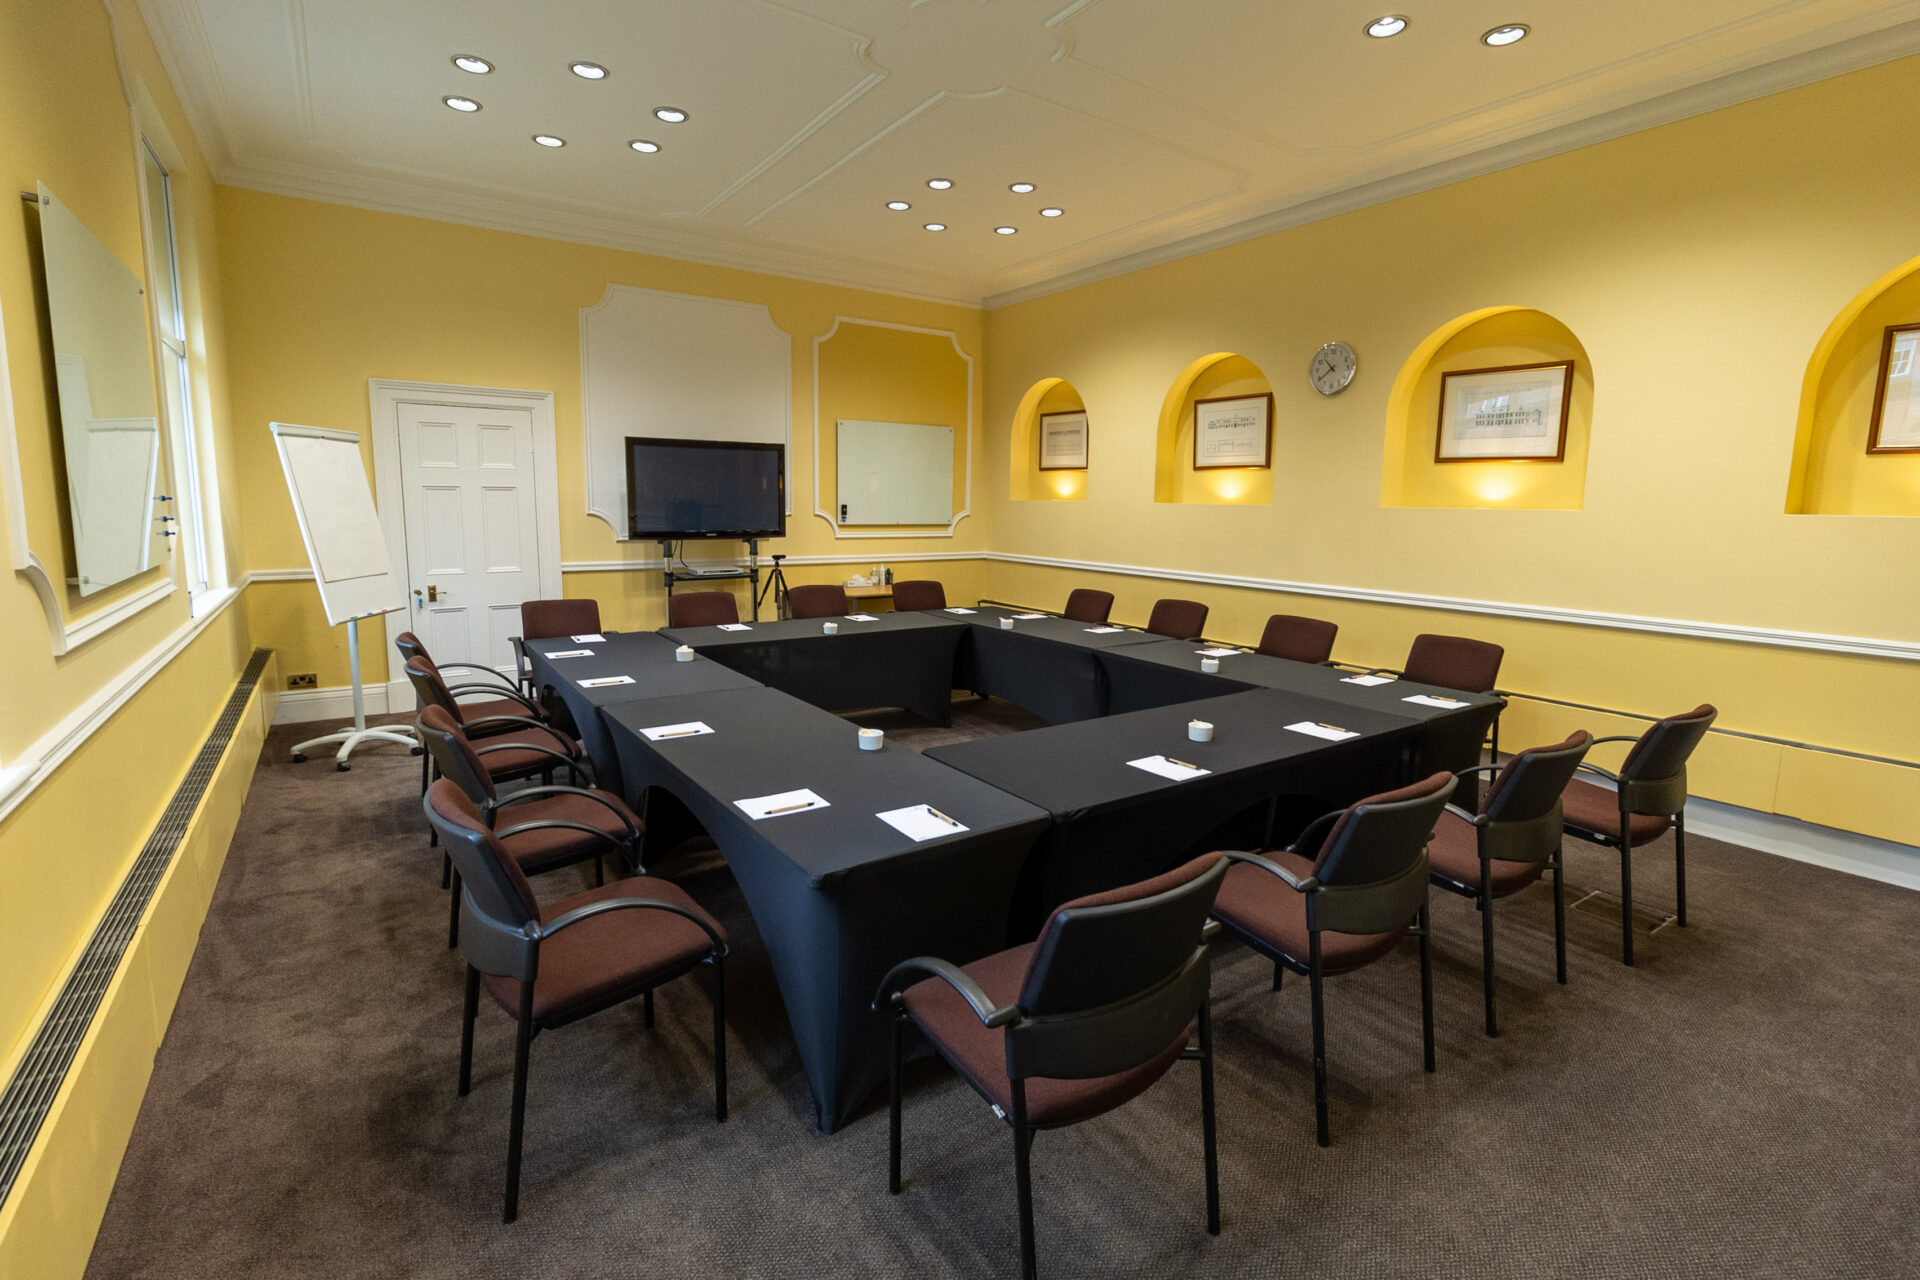 The Hodgson conference room, laid out as a boardroom to accommodate up to 16 people.